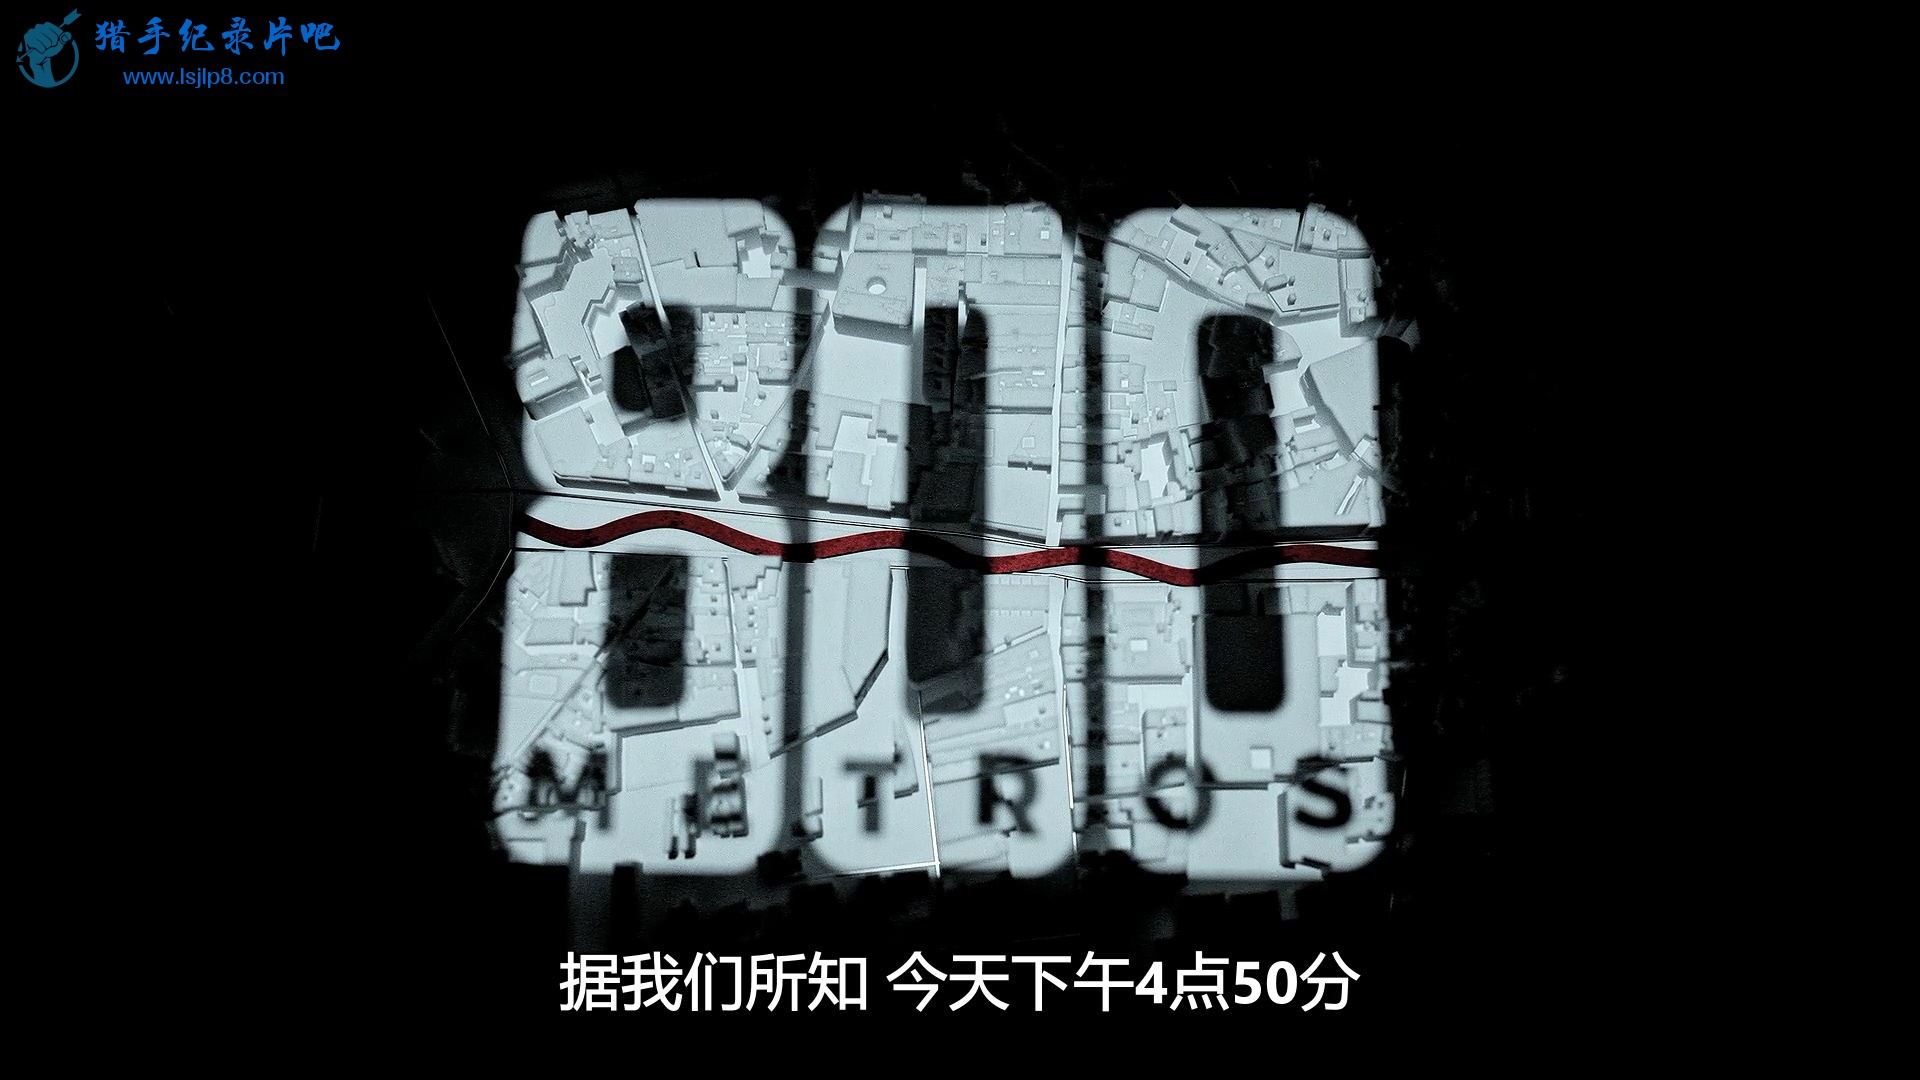 800.Meters.S01E01.A.Group.of.Friends.1080p.NF.WEB-DL.DUAL.DDP5.1.x264-TEPES.jpg